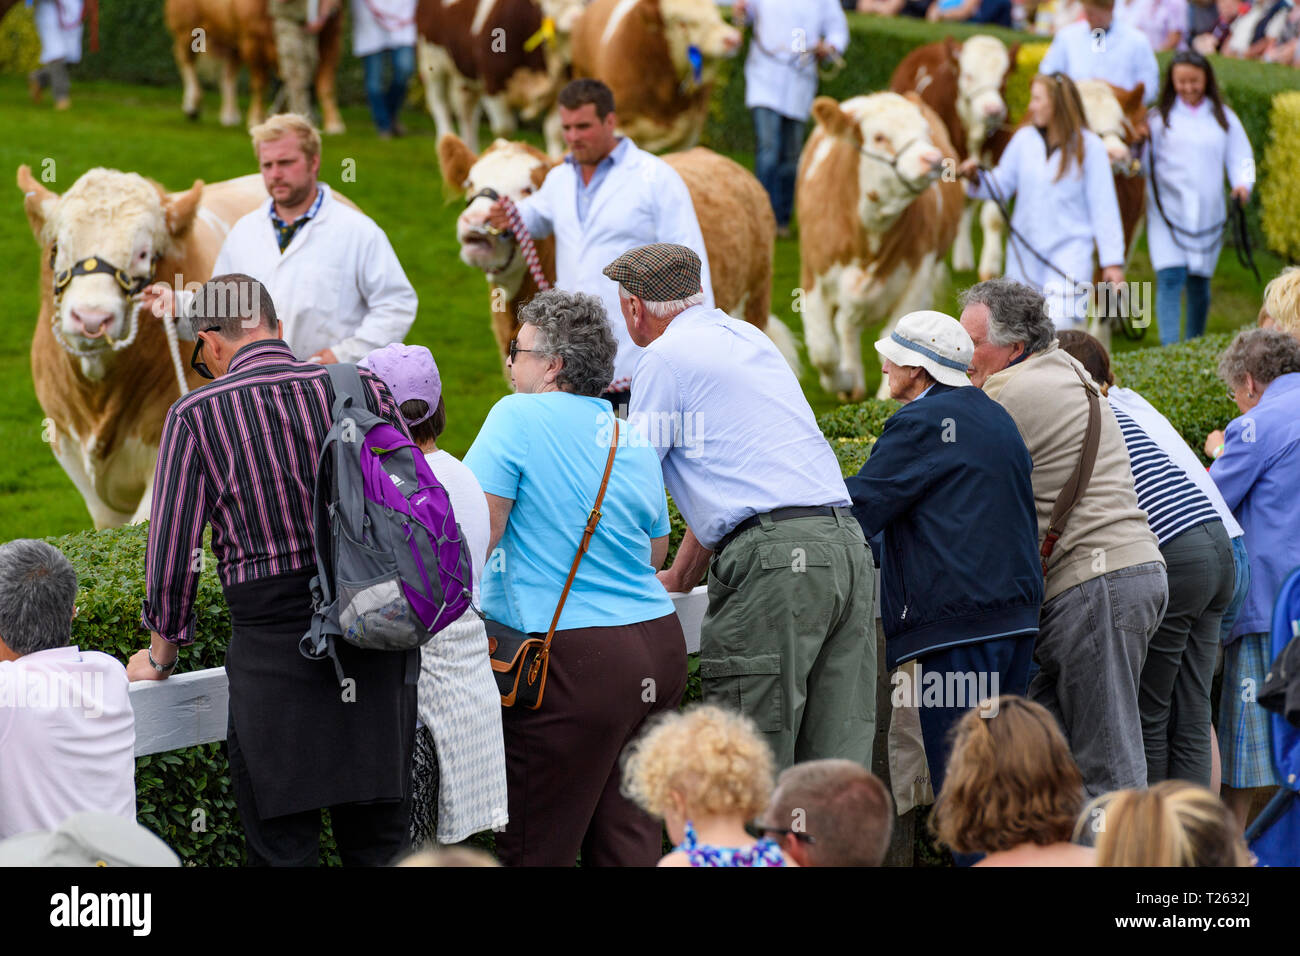 Continental beef & dairy cattle (simmental) parade with handlers around arena watched by big crowd - The Great Yorkshire Show, Harrogate, England, UK. Stock Photo